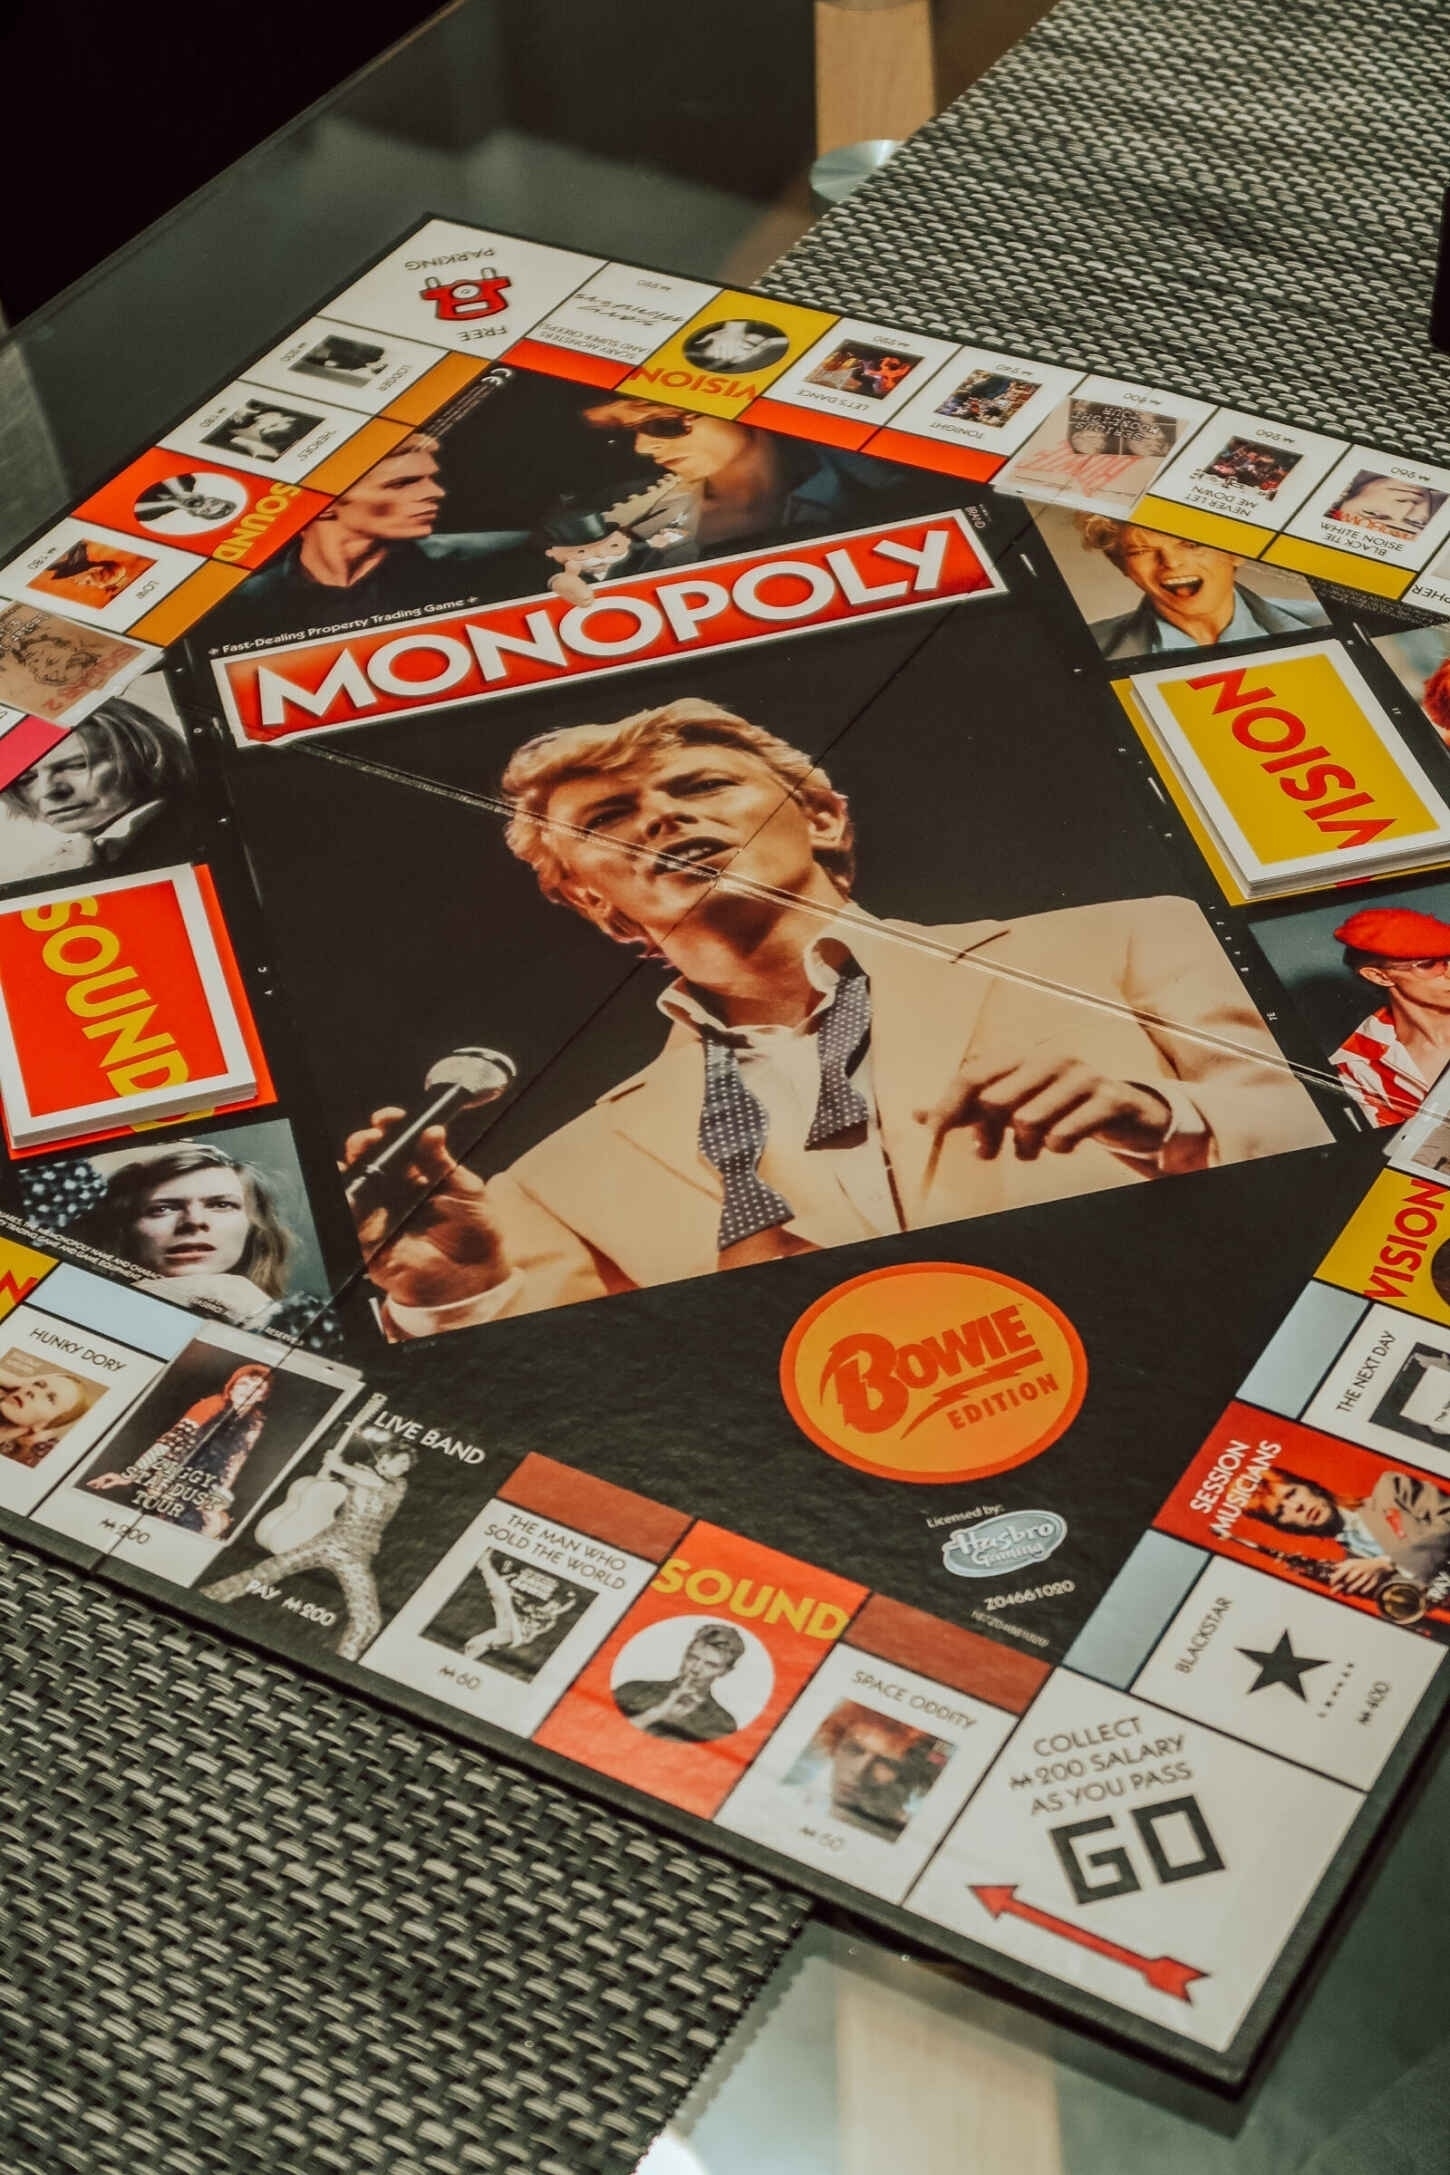 Bowie monopoly